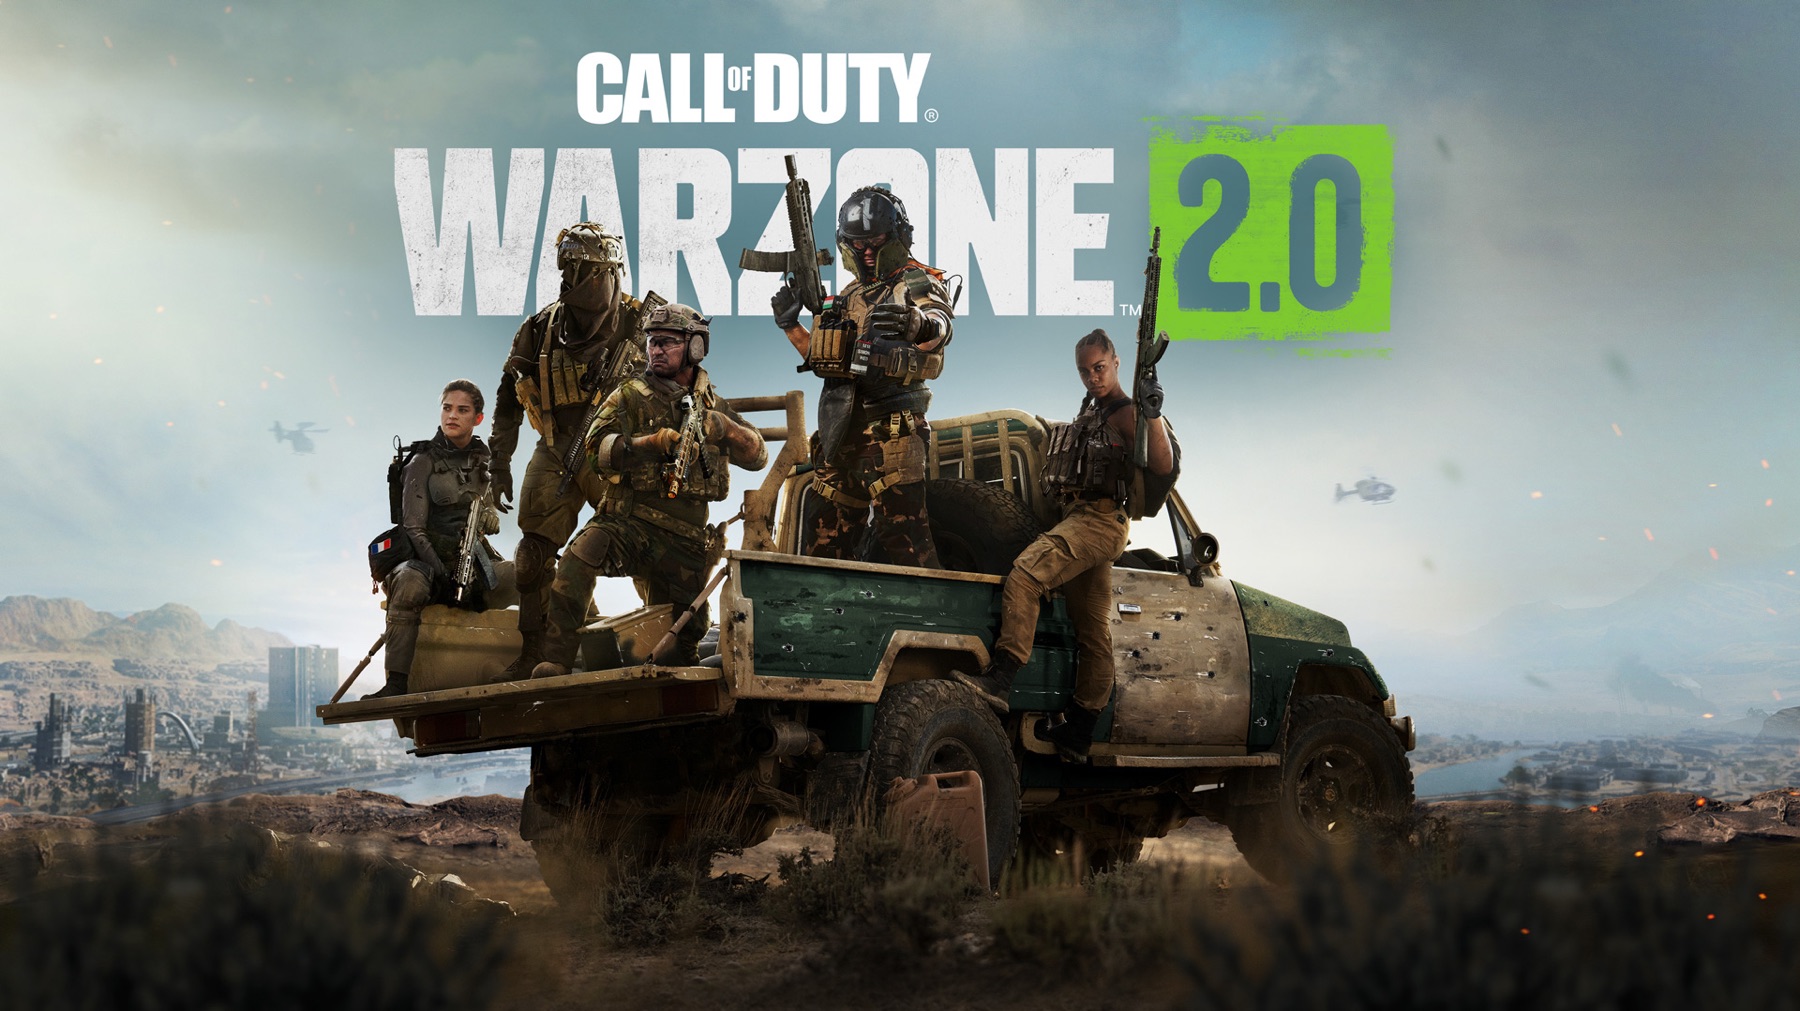 Warzone 2.0 release time and preload times